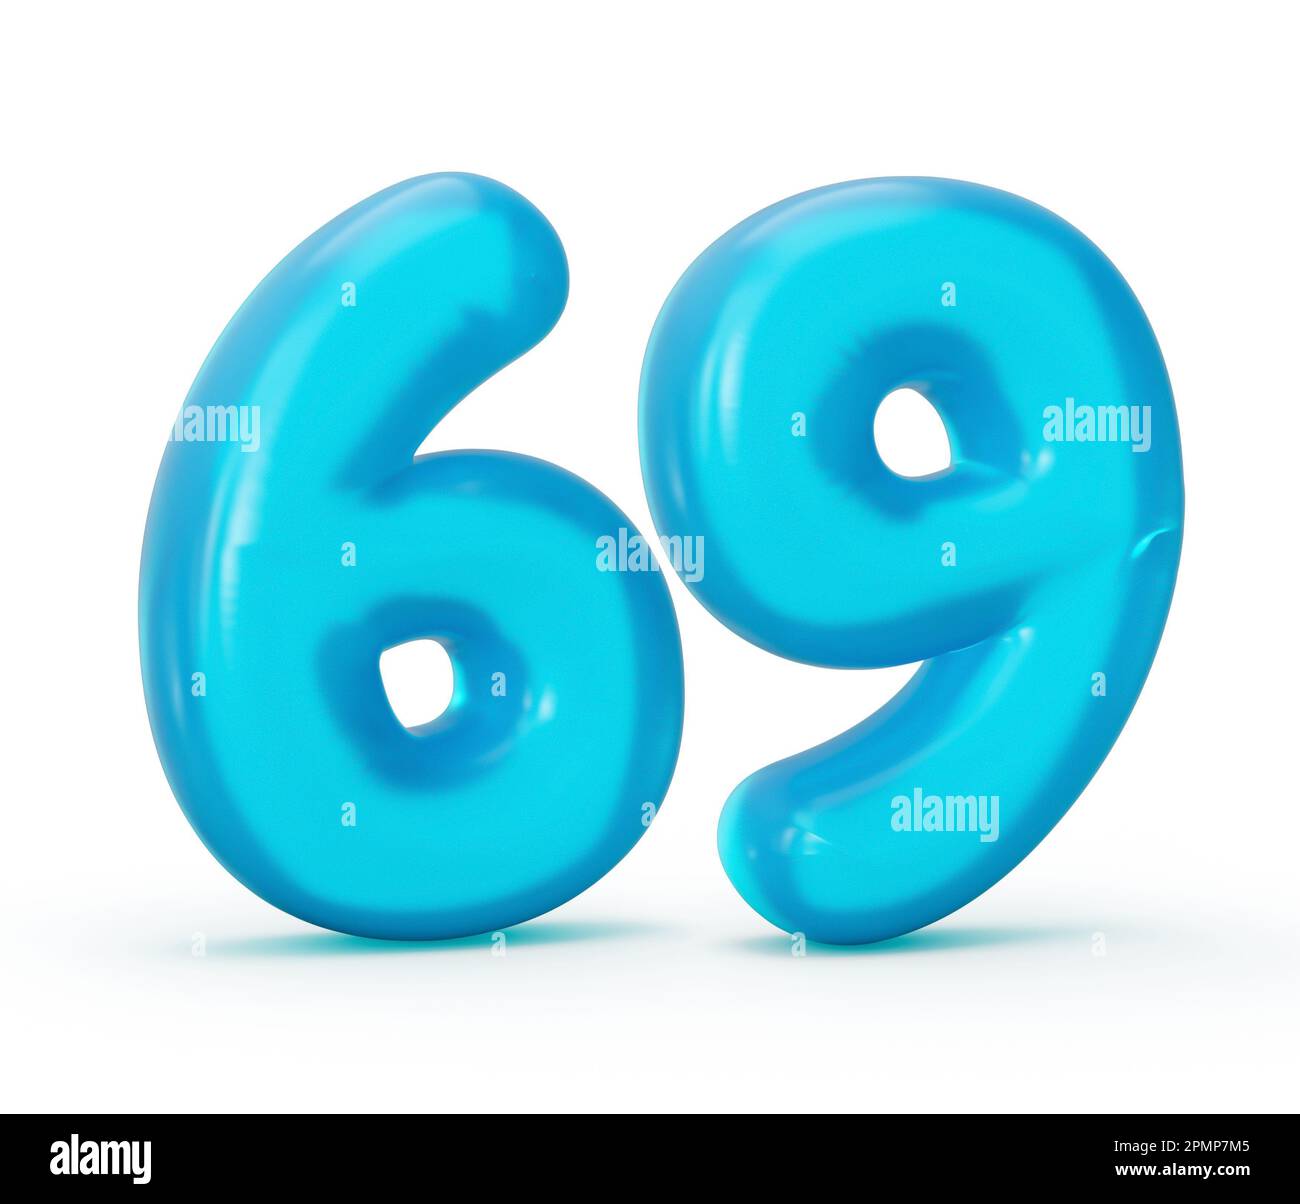 Isolated image of a blue number 69 made from liquid on a plain white background Stock Photo